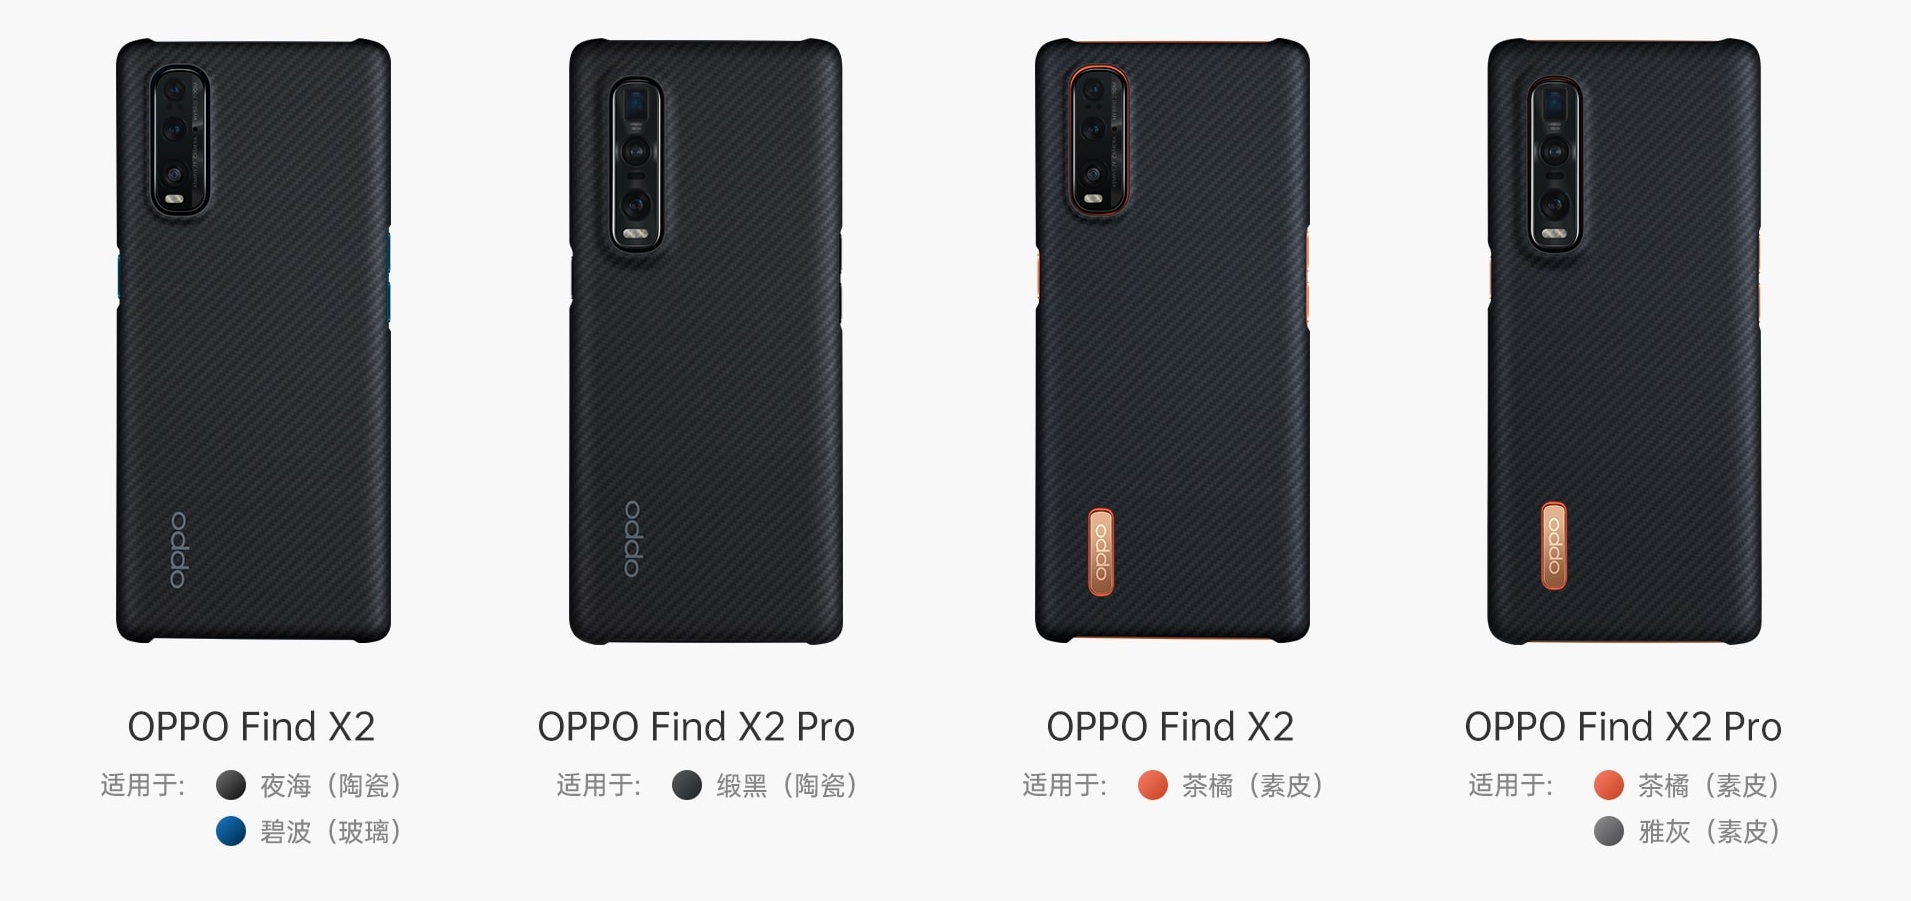  Case for Oppo Find X2 Pro 5g Case Compatible with Oppo Find X2  Pro 5g Phone Case PC backplane + Silicone Soft Frame Cover [360 Metal Ring,  Magnetic Car Mount] CSKB-LV 